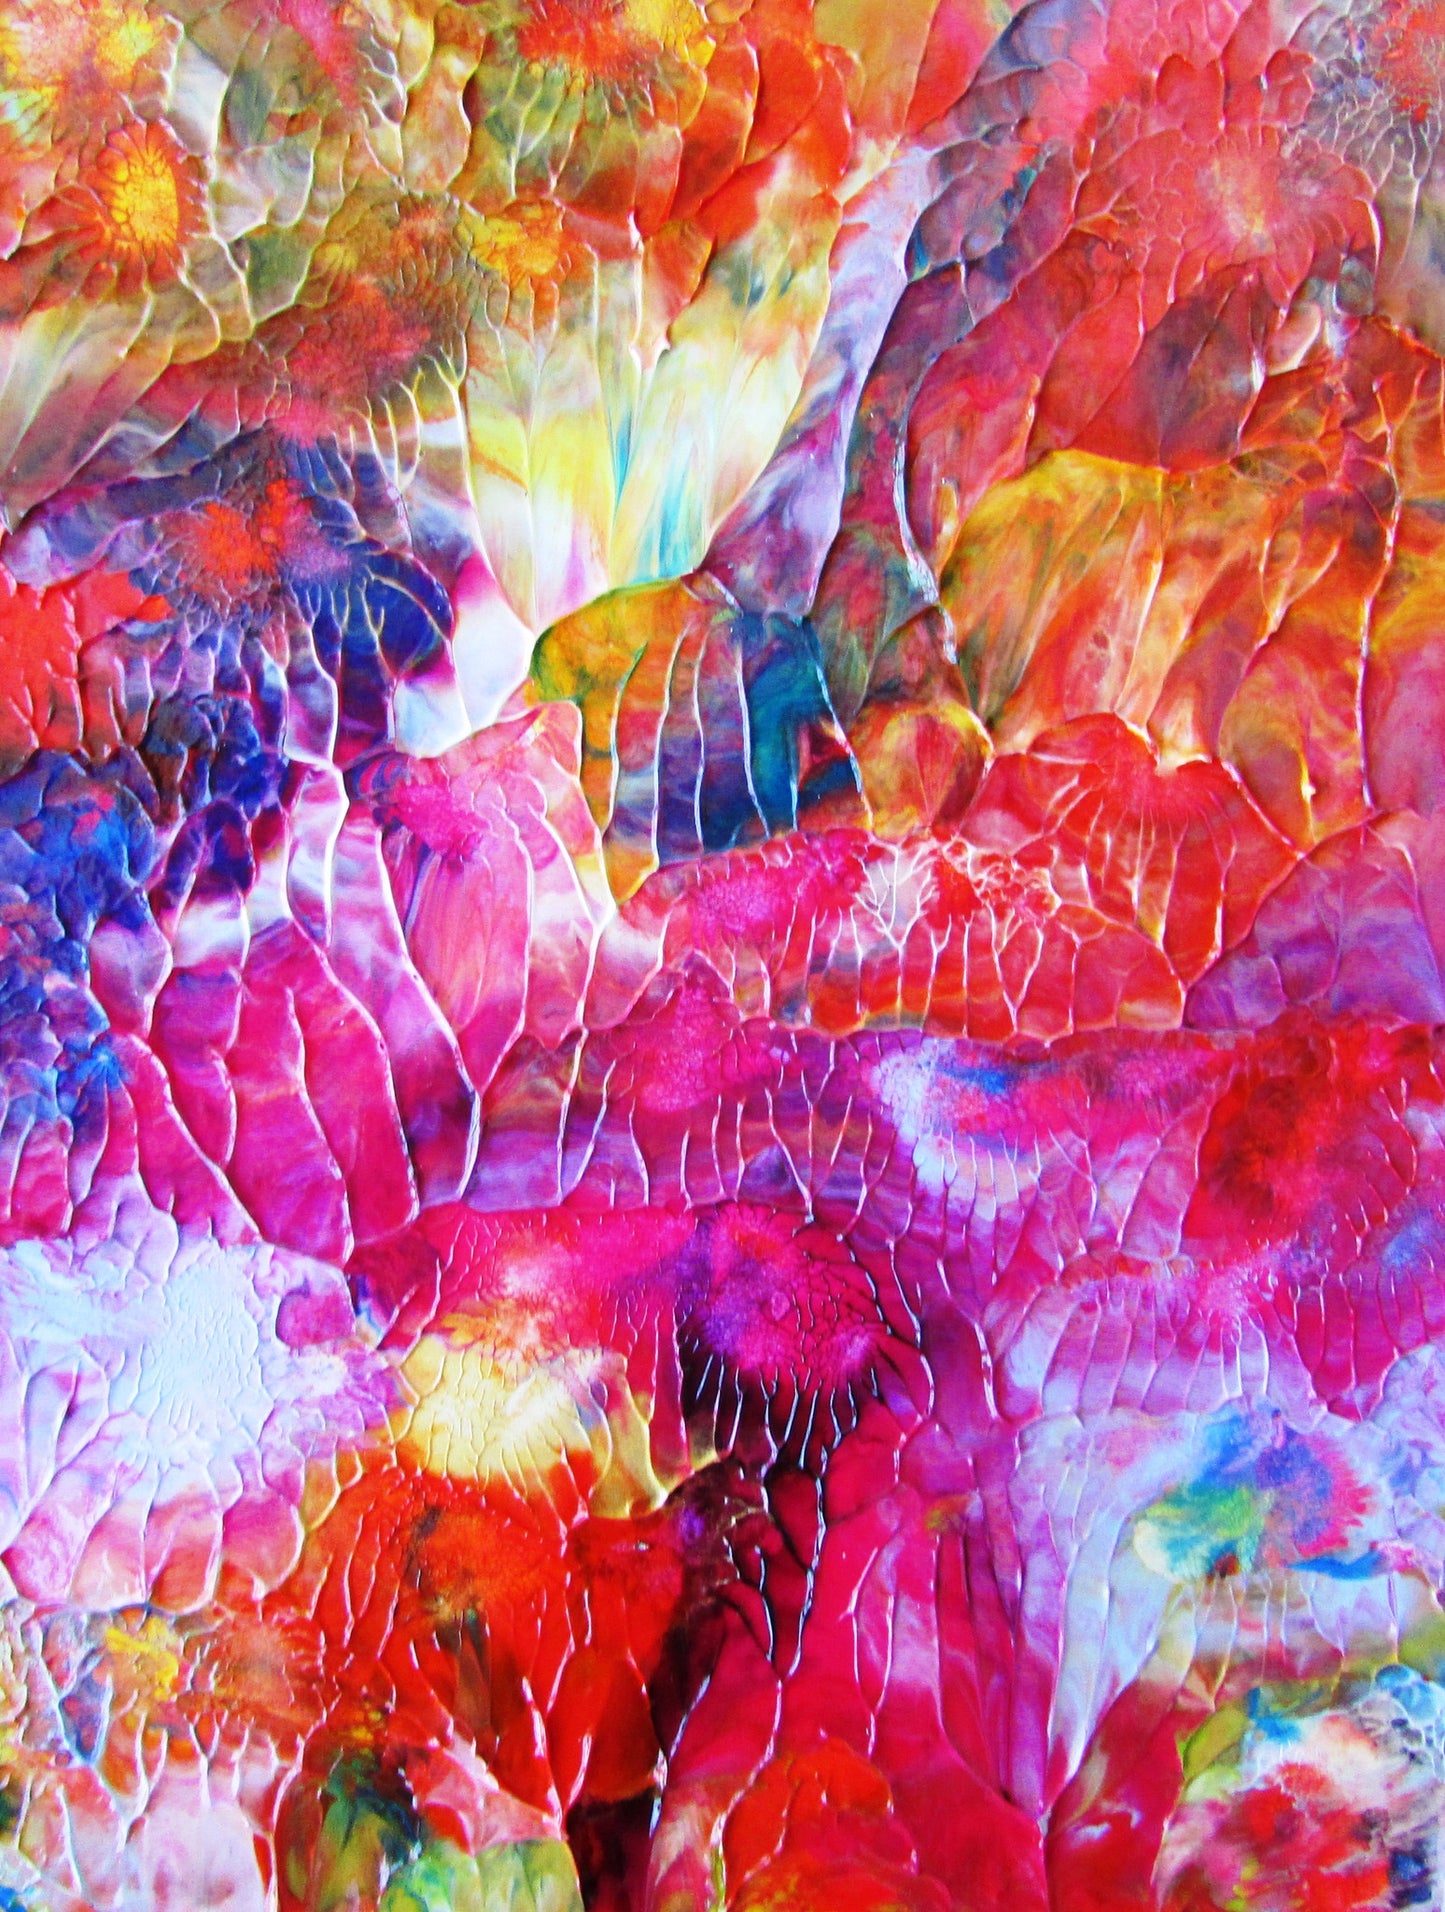 Garden Shine Abstract Original Painting by Ryan O'Neill in White Mat